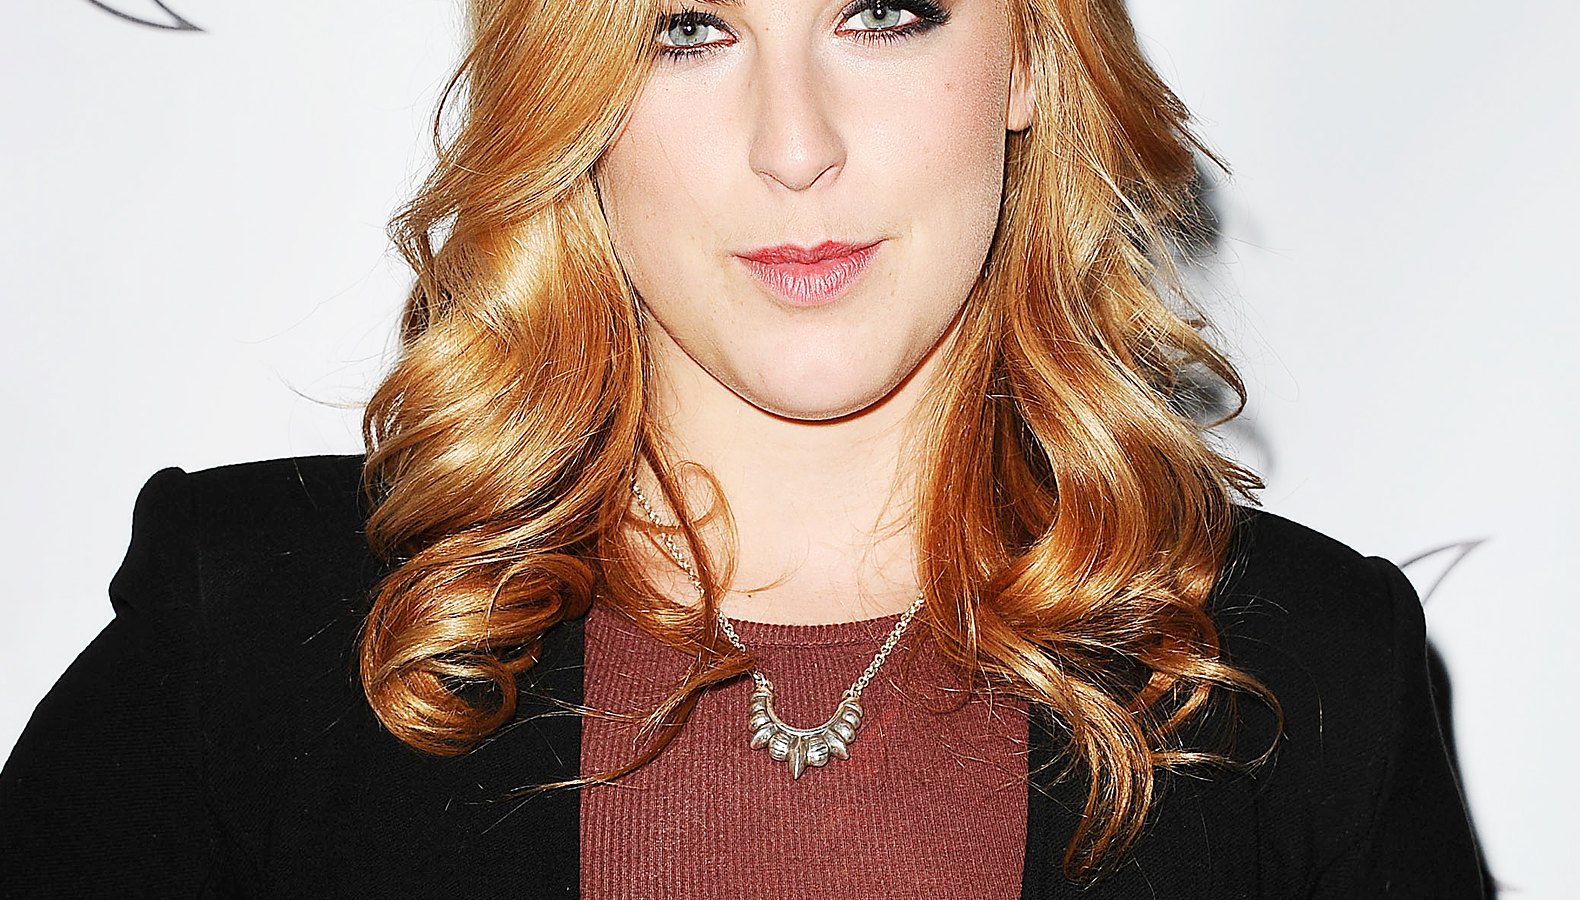 Scout Willis attends an event on April 4, 2014